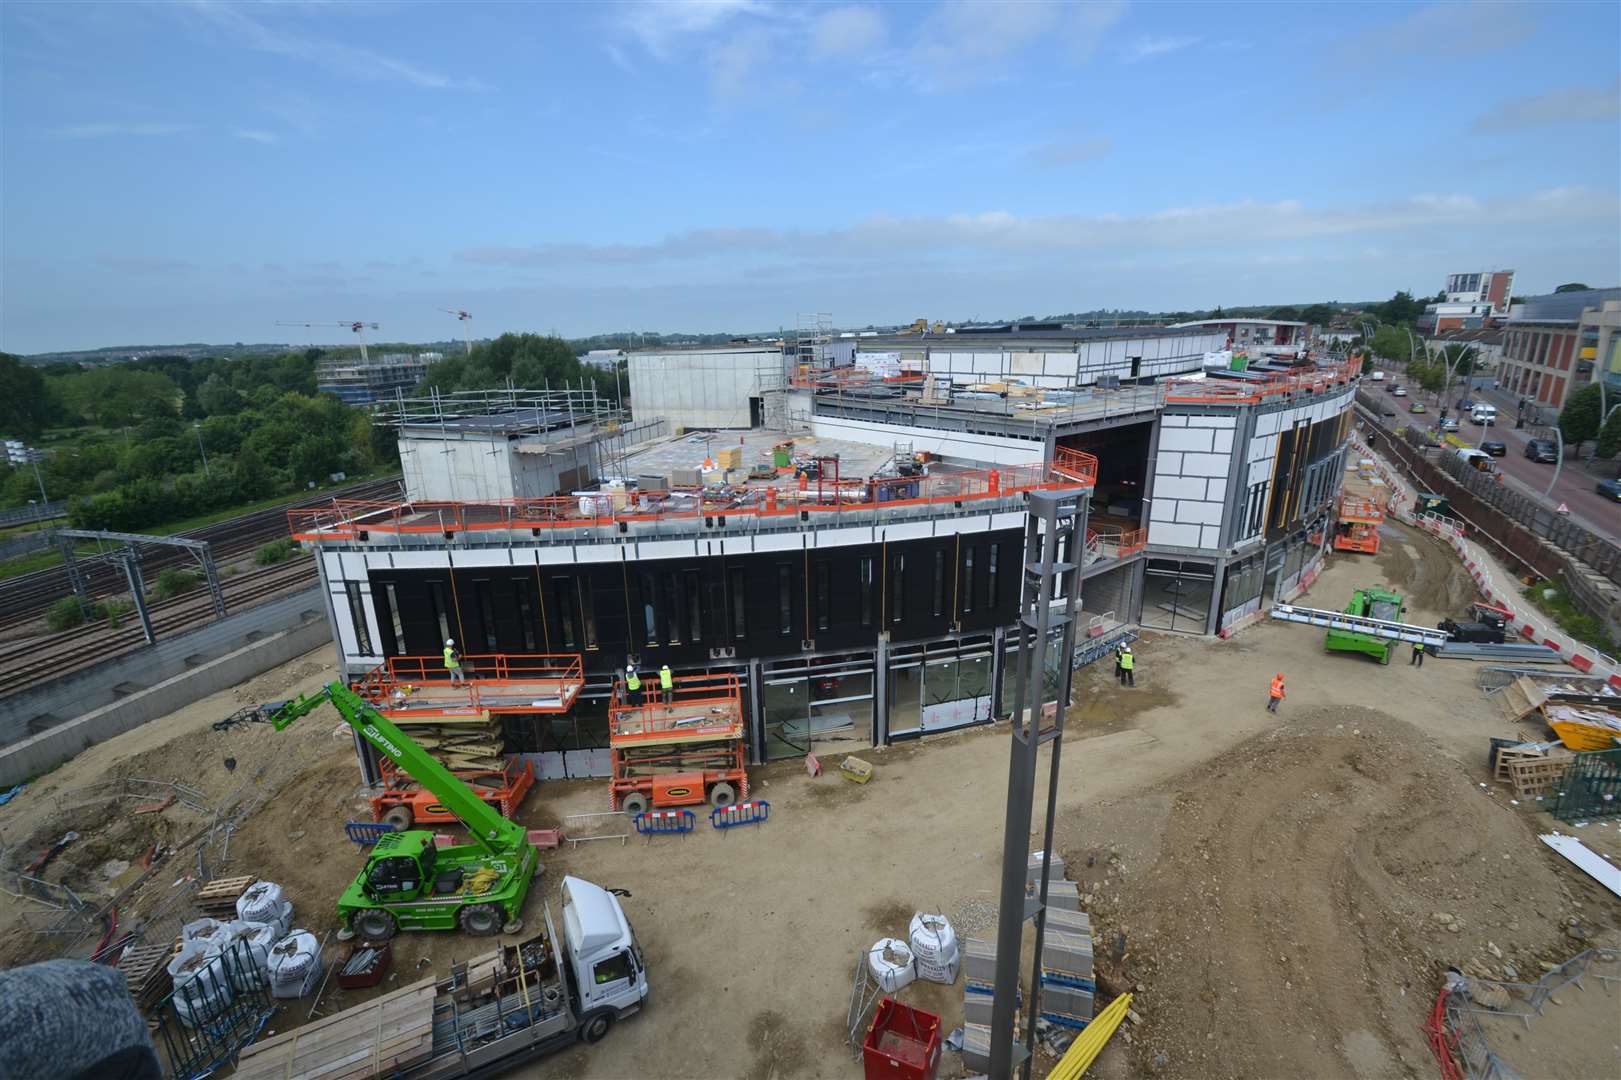 The current view of the new cinema, taken from the Travelodge roof. Picture: Steve Salter